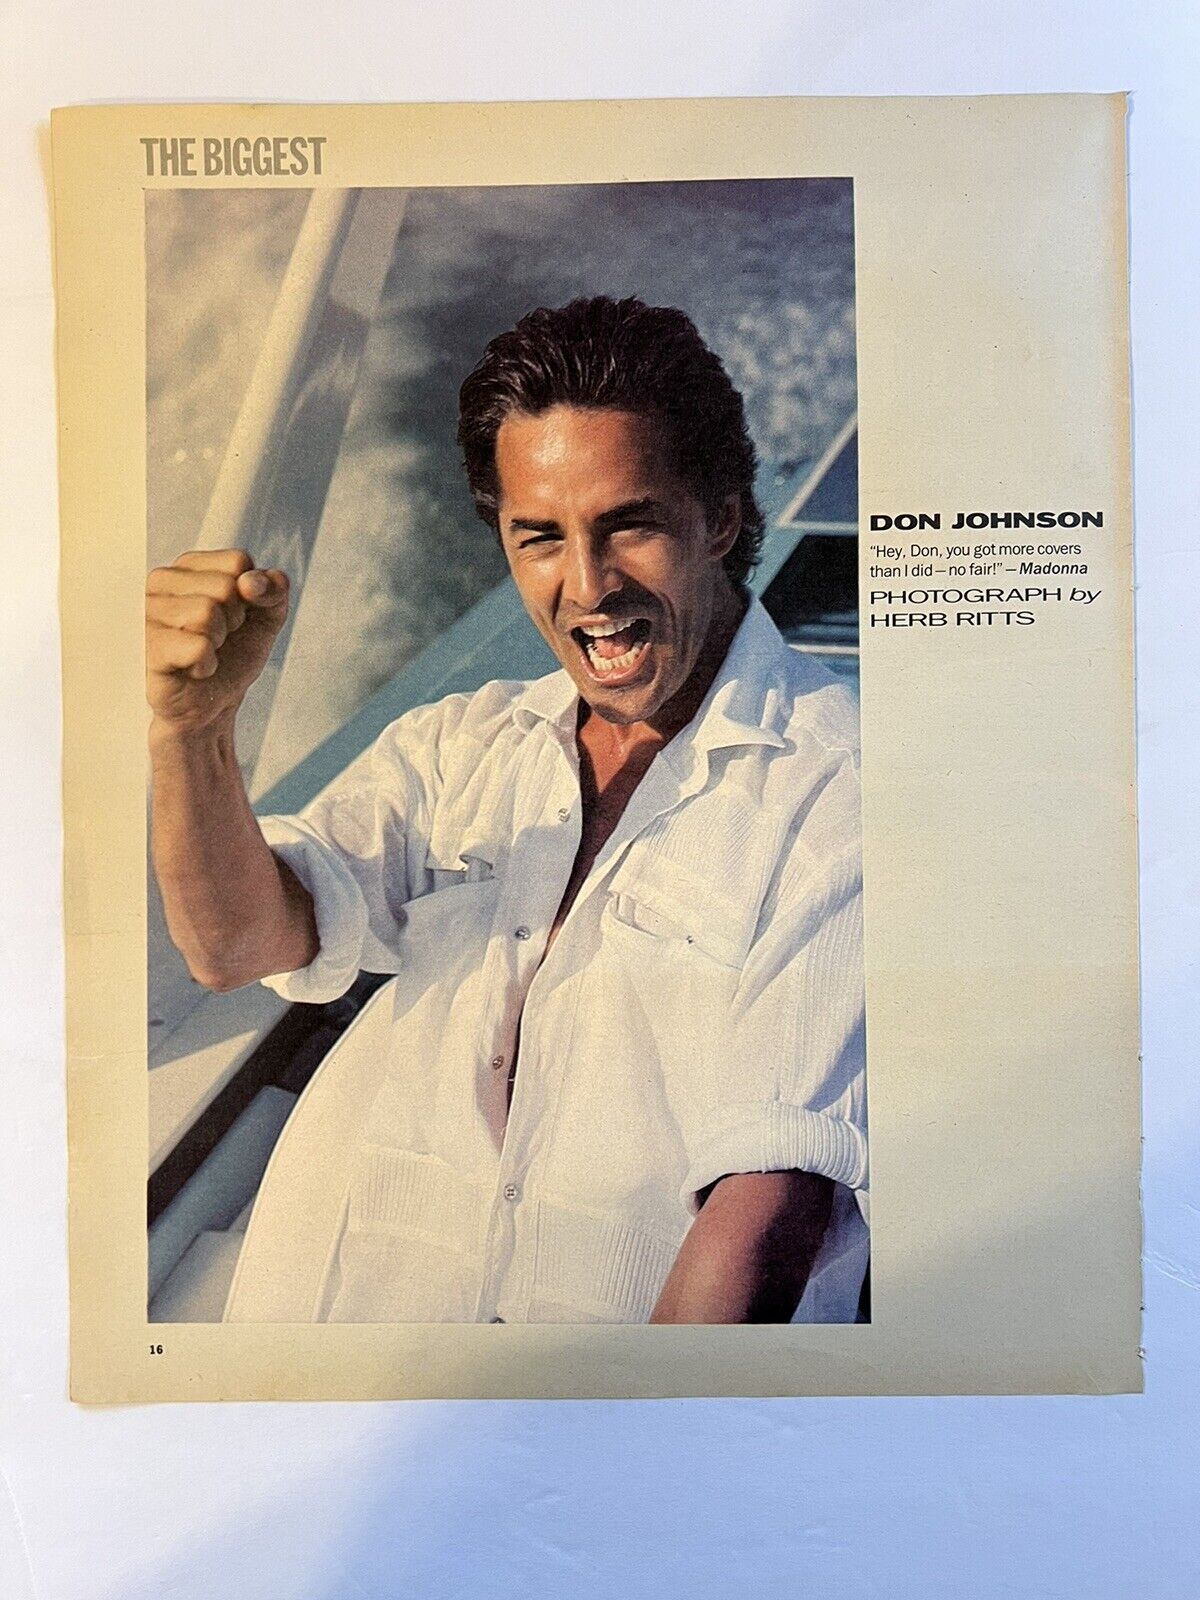 Vtg 1985 Photographic Portrait, Don Johnson, by Herb Ritts, Quote by Madonna